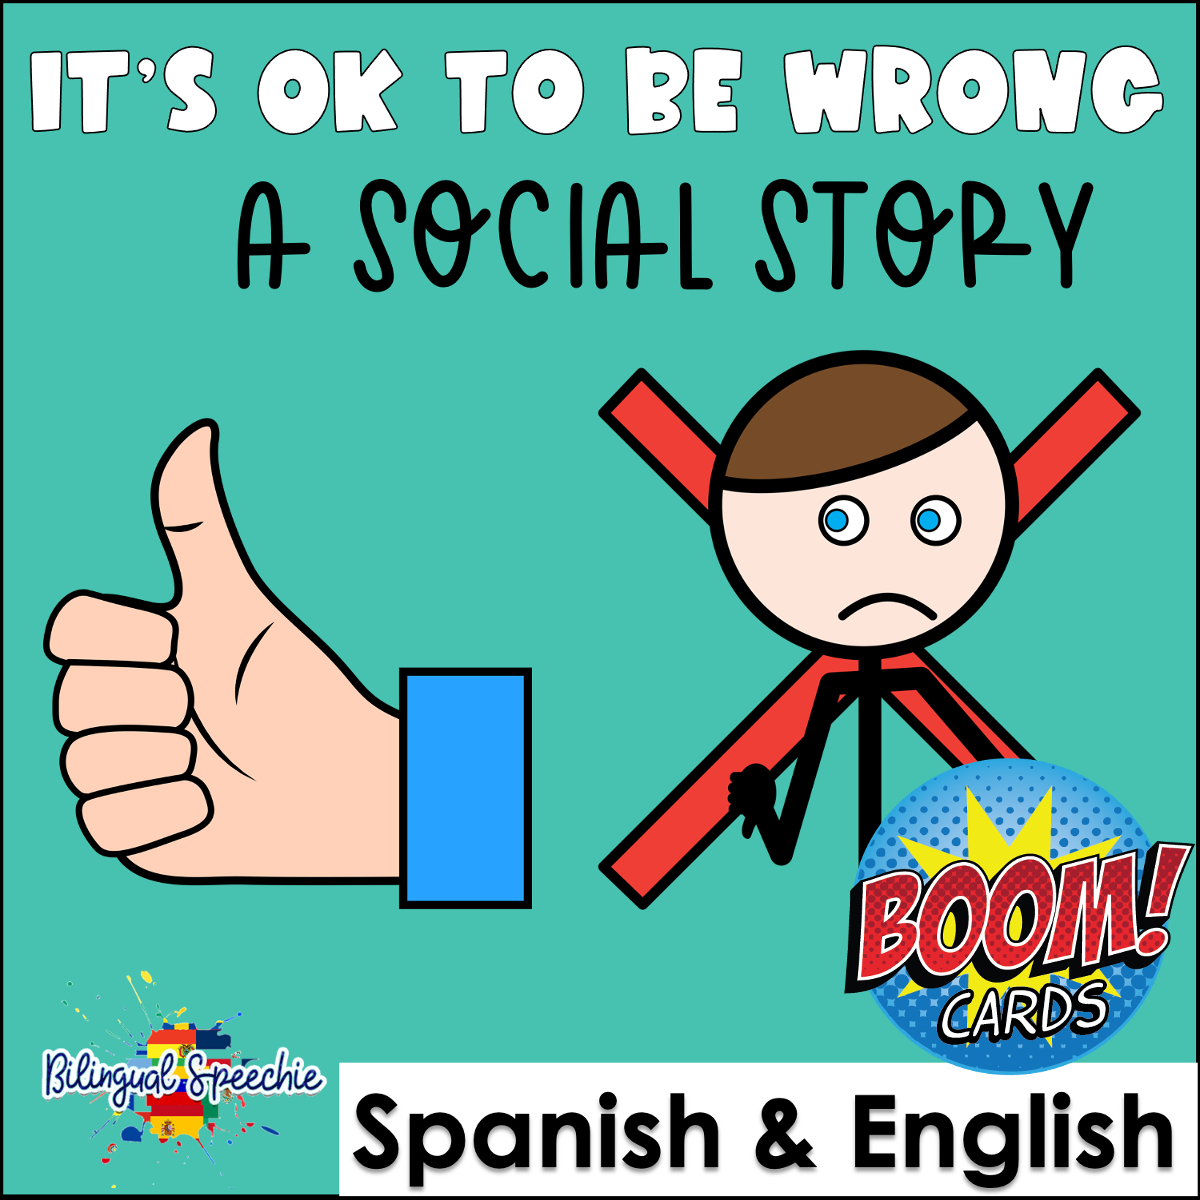 It's Ok to be Wrong | A Bilingual Social Story